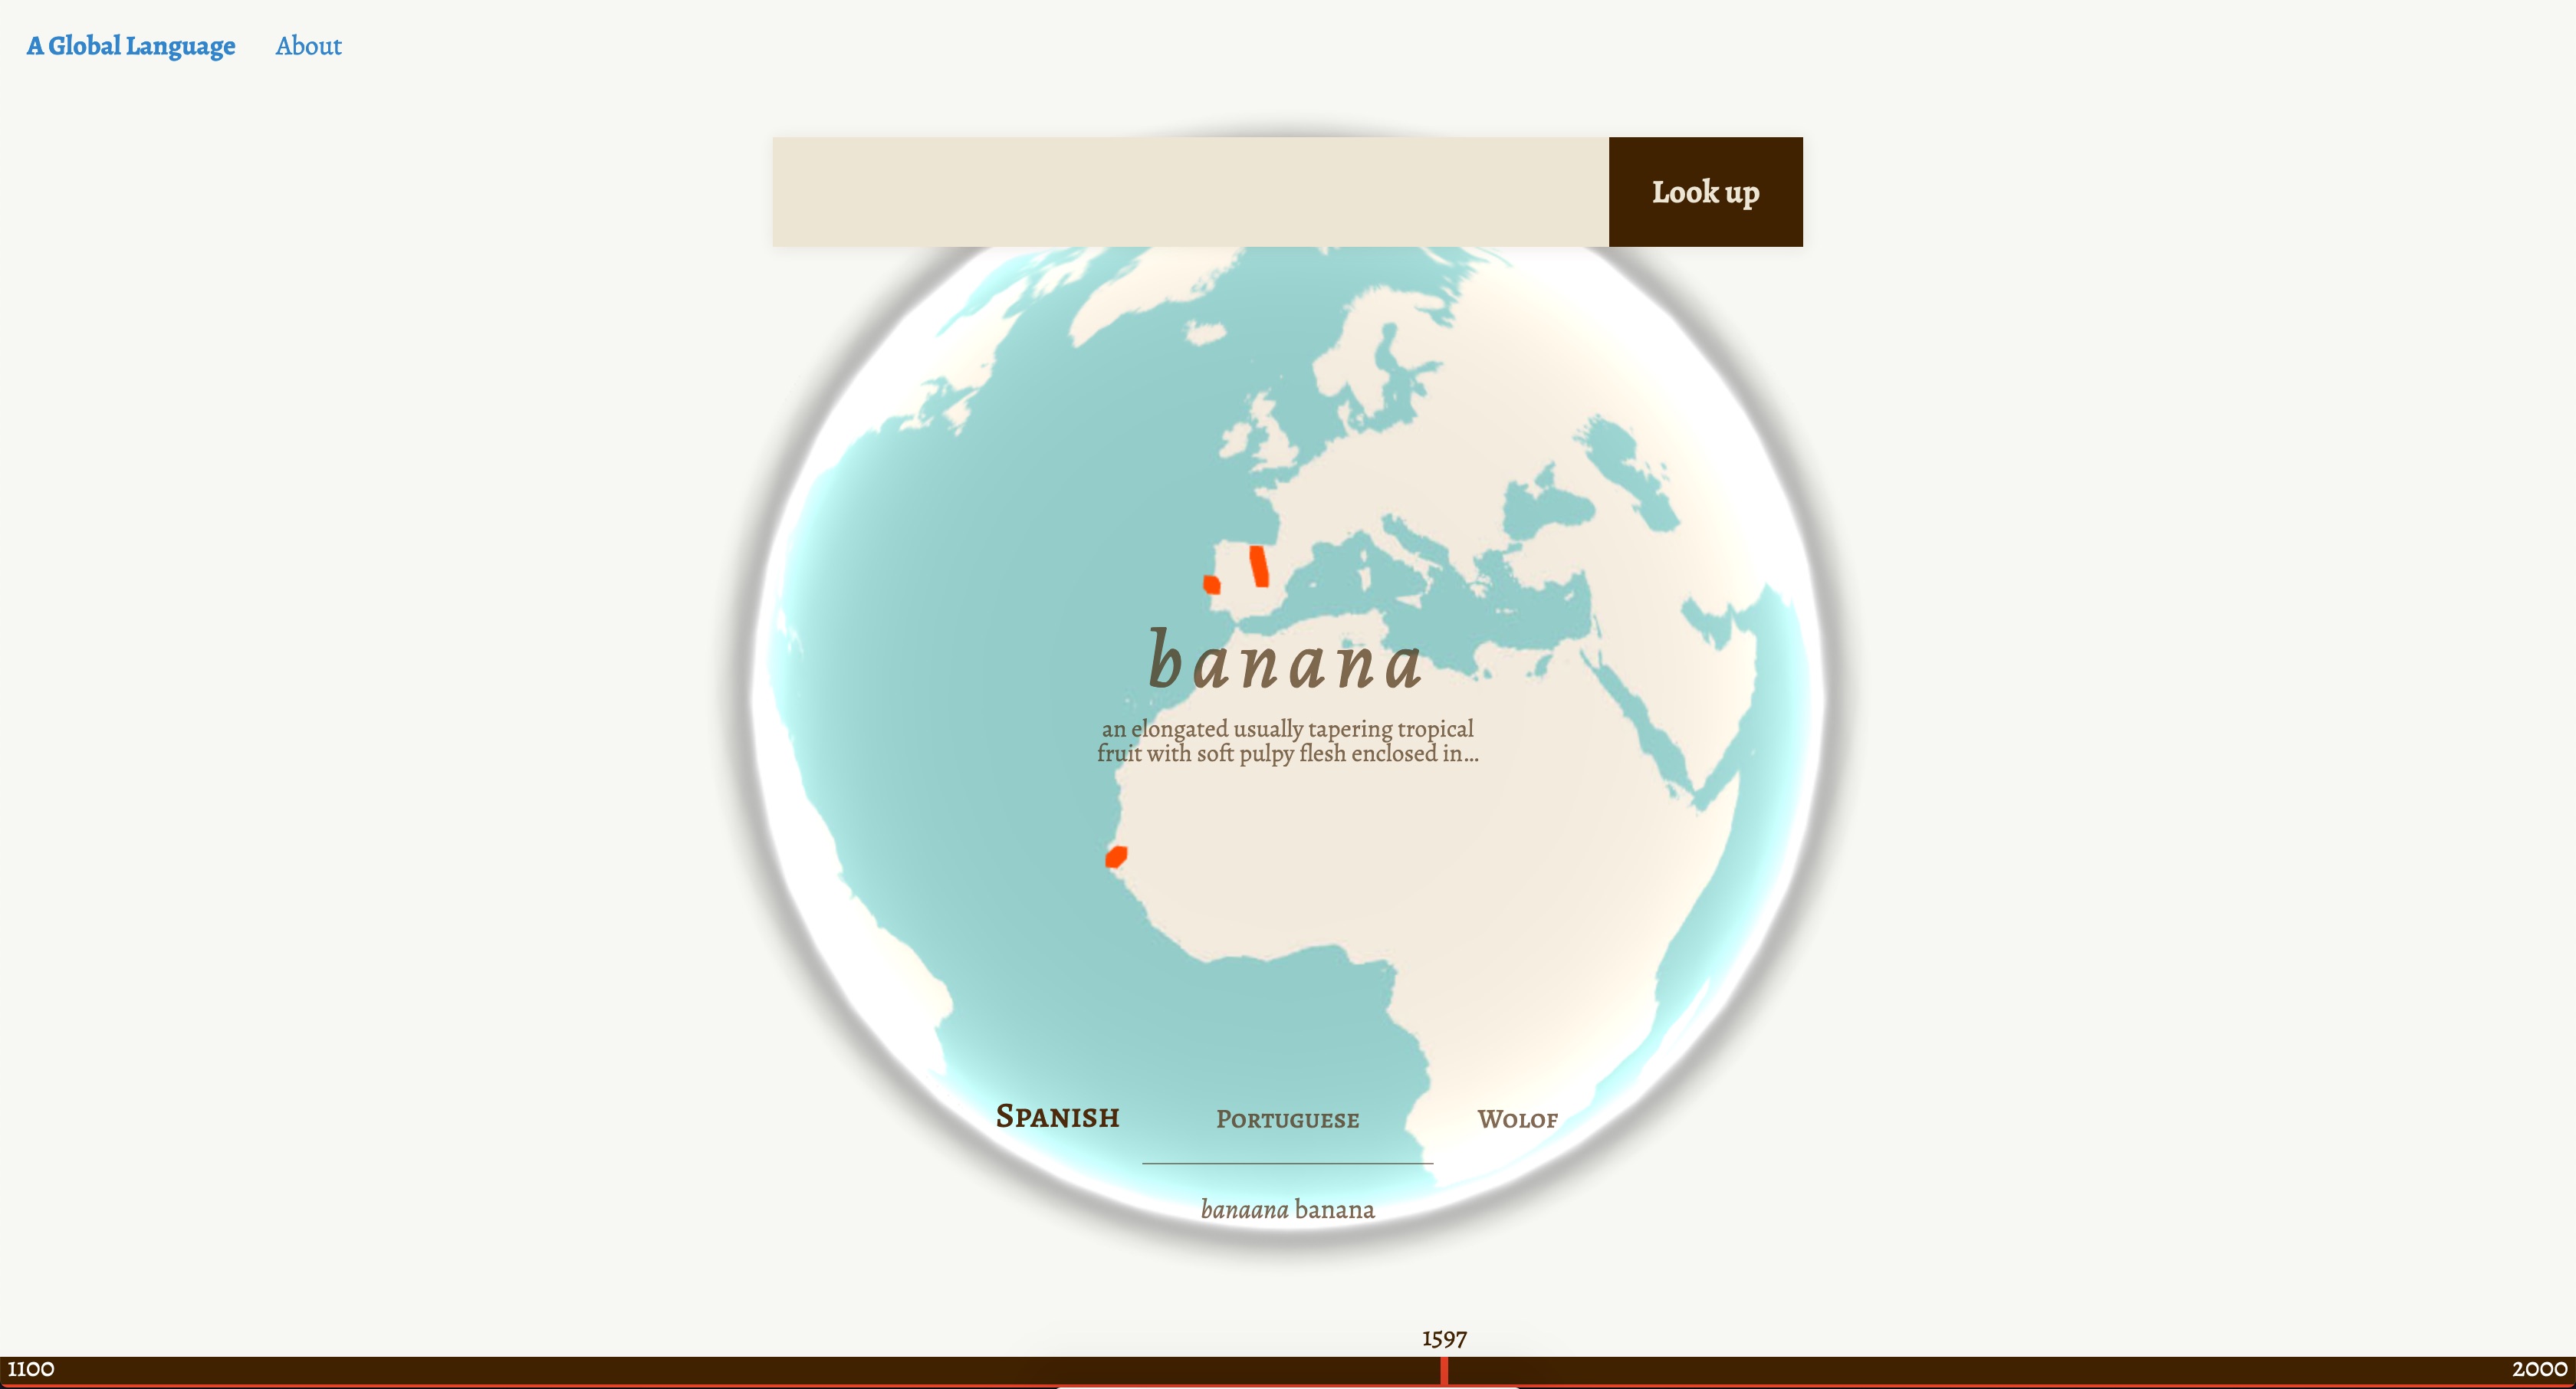 Webpage showing results for "banana", with three points on the globe, a section of languages, and a historical timeline